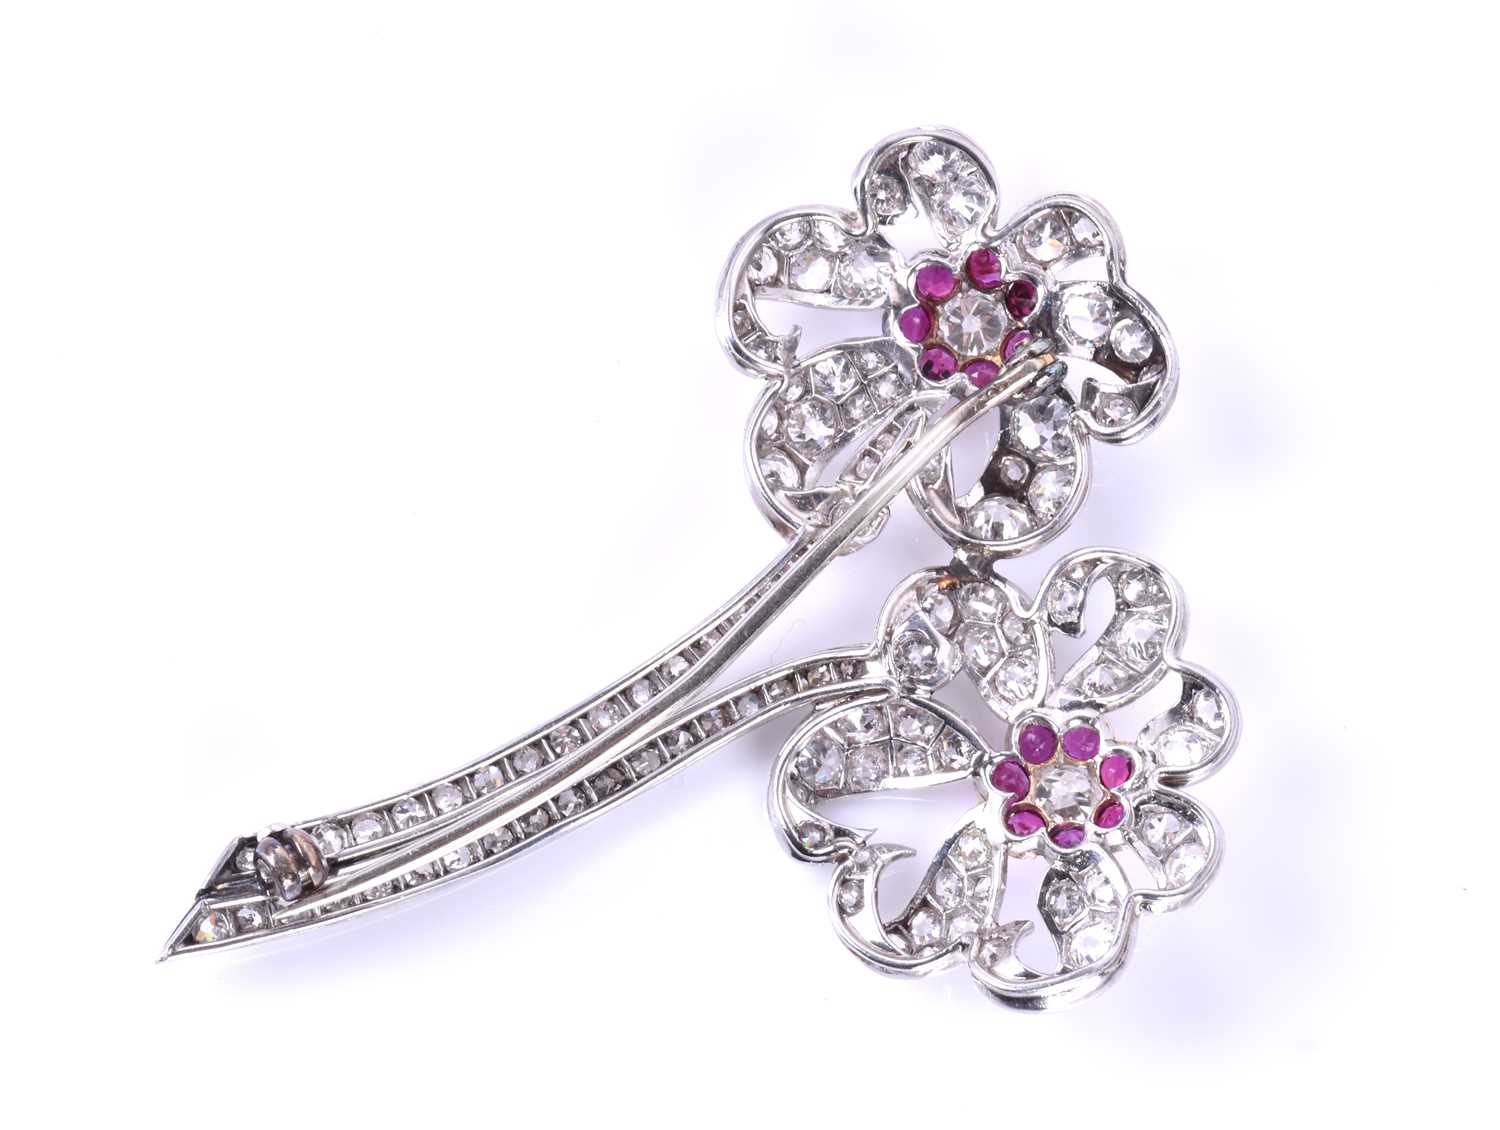 An impressive diamond and ruby floral broochcirca early to mid 20th century, each flower centred - Image 5 of 5